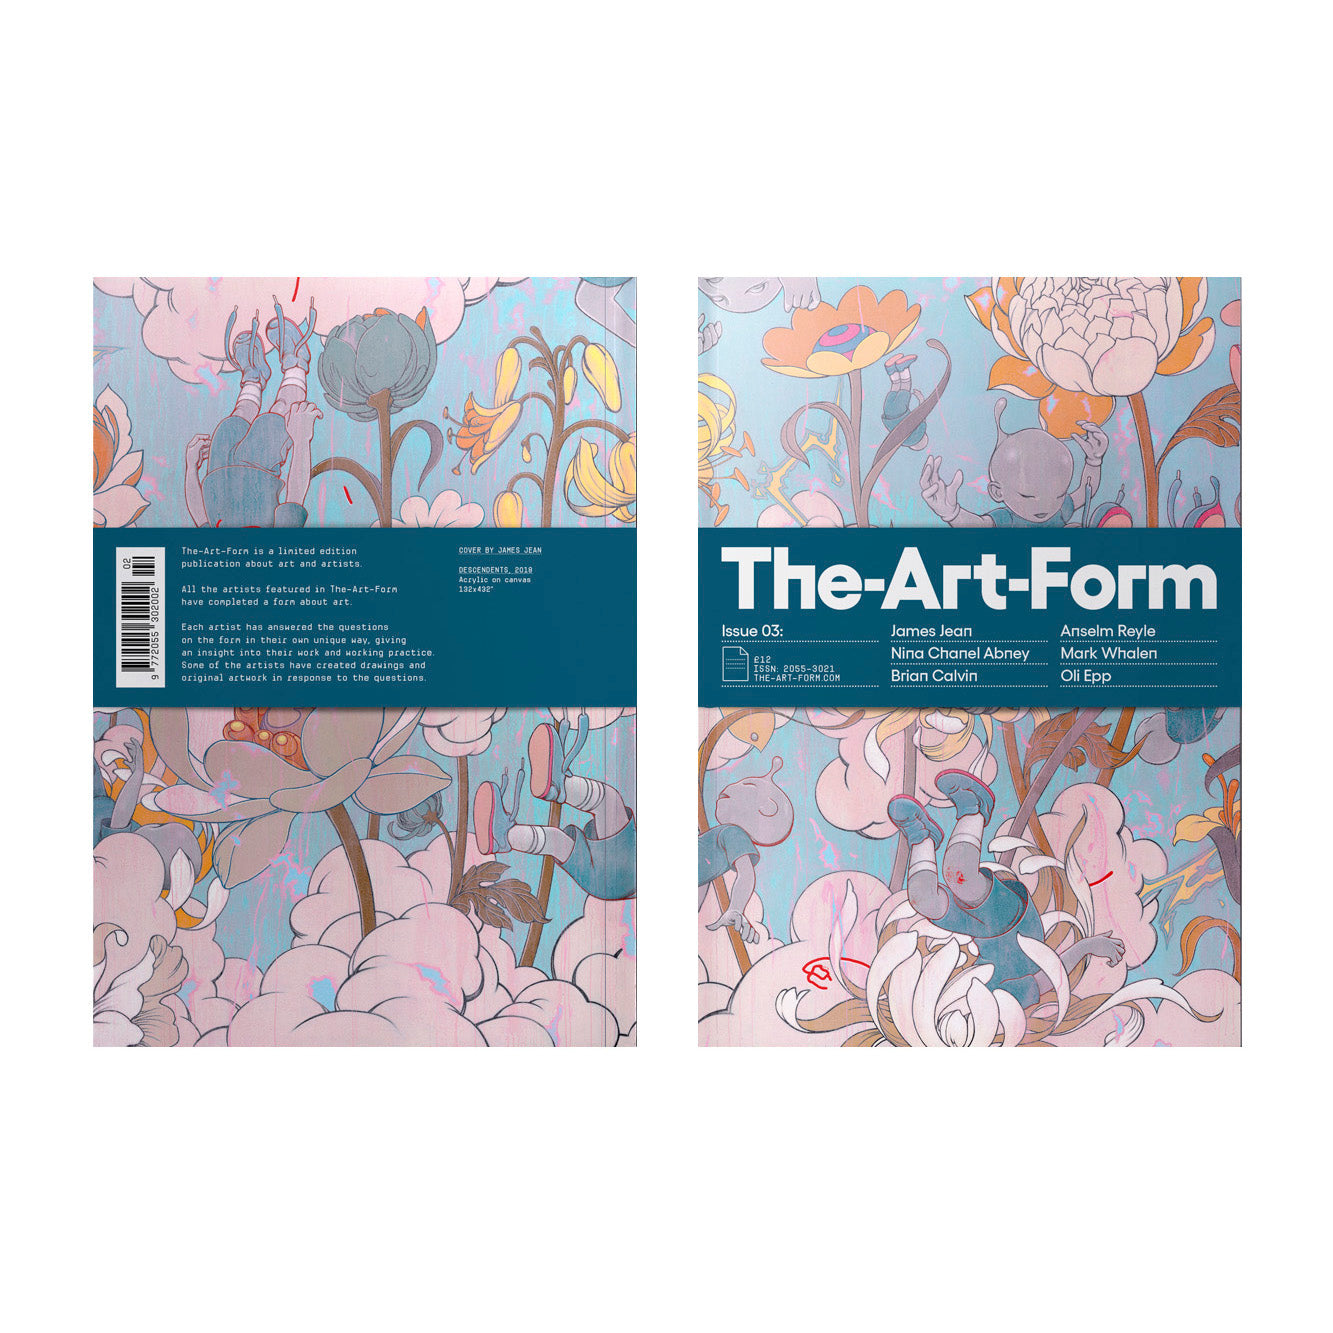 ISSUE 03: James Jean Cover